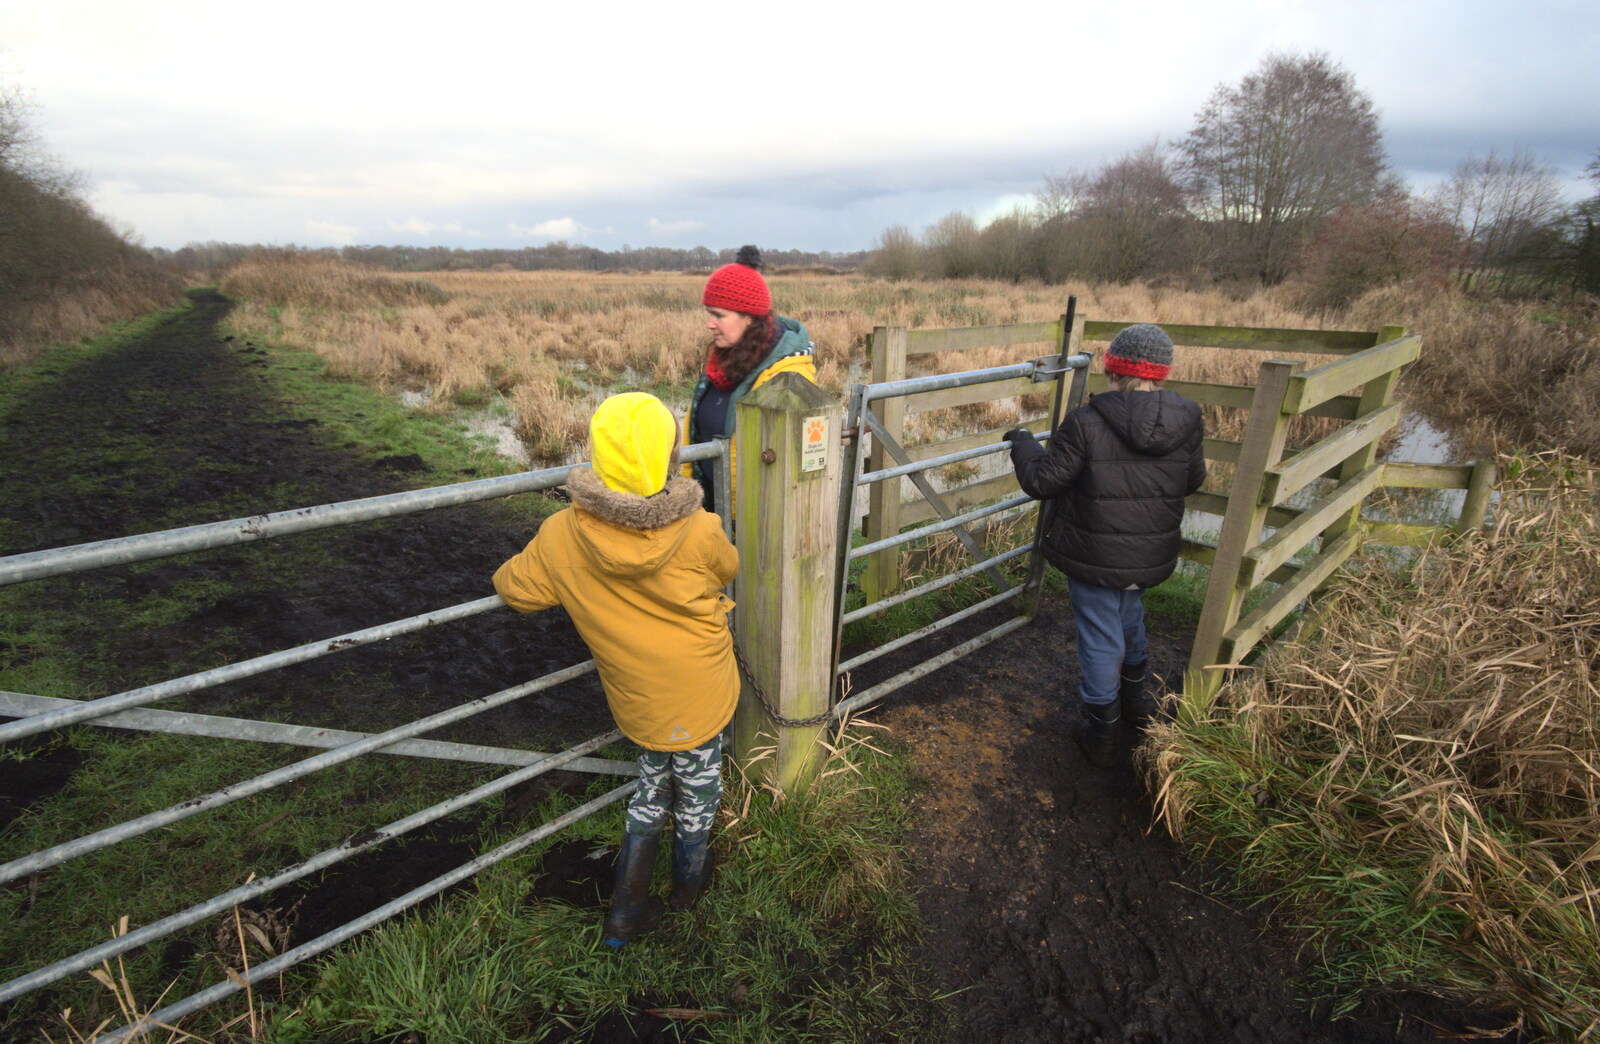 Harry hangs on a gate from A Walk Around Redgrave and Lopham Fen, Redgrave, Suffolk - 3rd January 2021